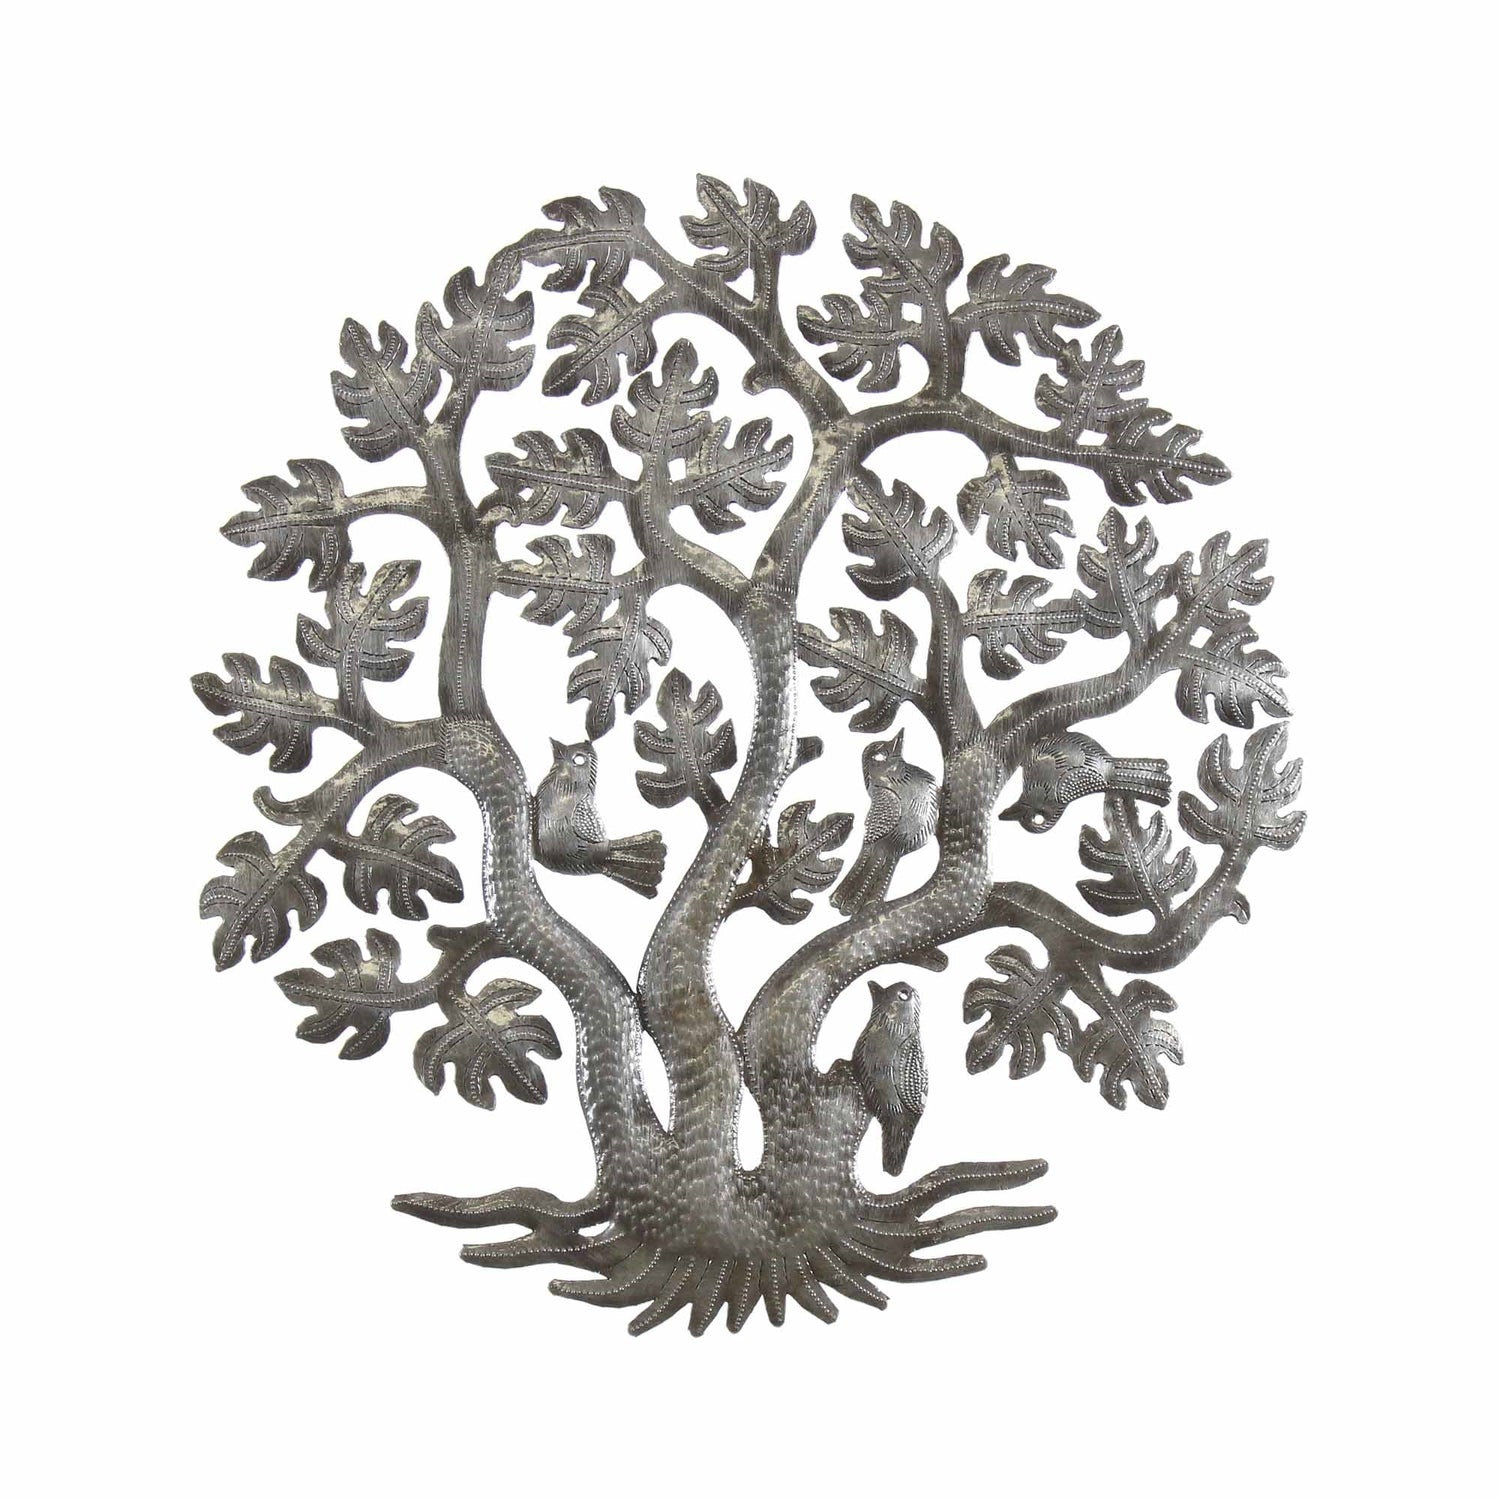 14-inch-3-trunk-tree-of-life-wall-art-croix-des-bouquets